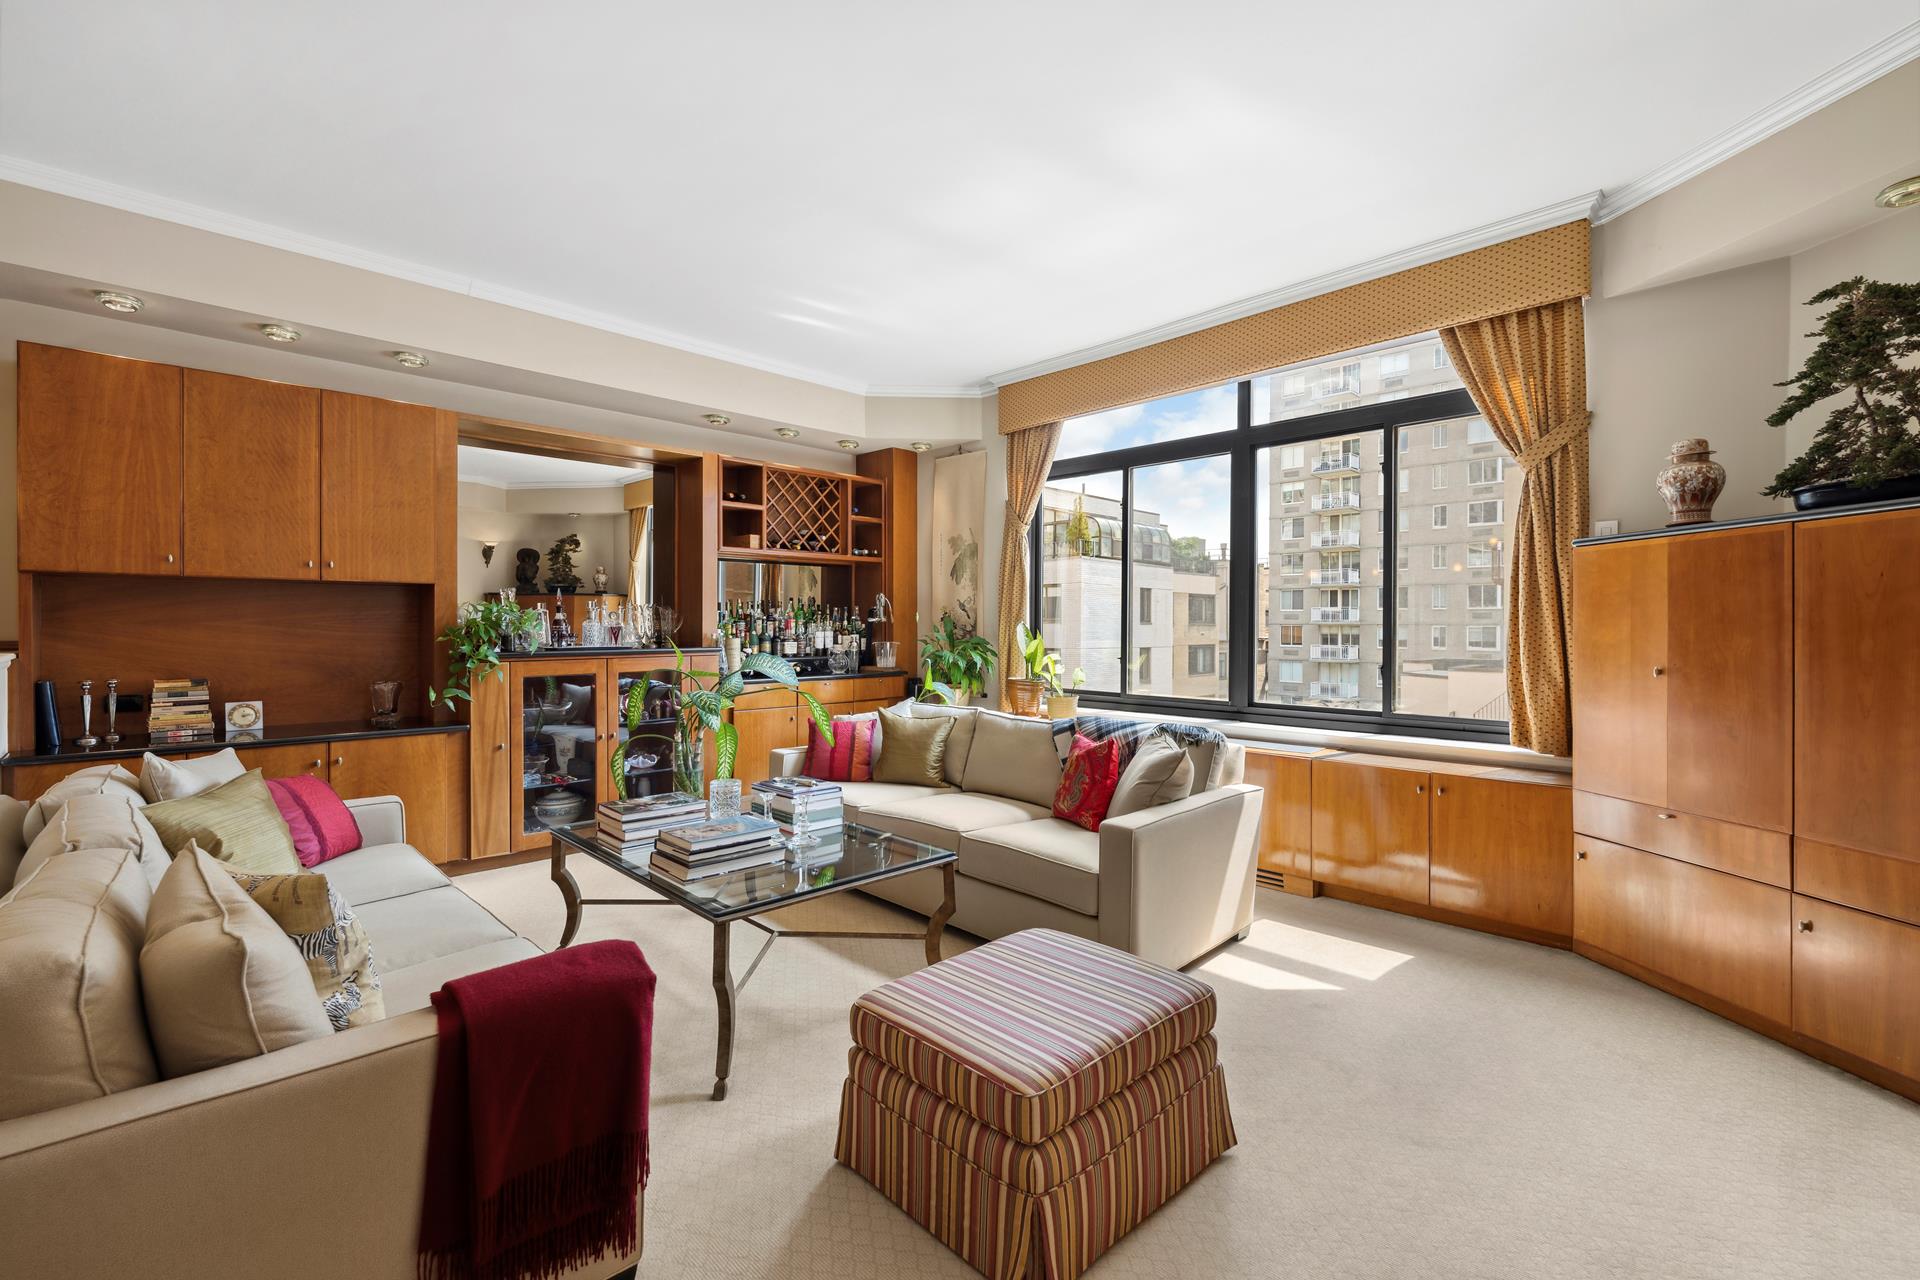 525 East 80th Street 10C, Yorkville, Upper East Side, NYC - 3 Bedrooms  
3 Bathrooms  
6 Rooms - 